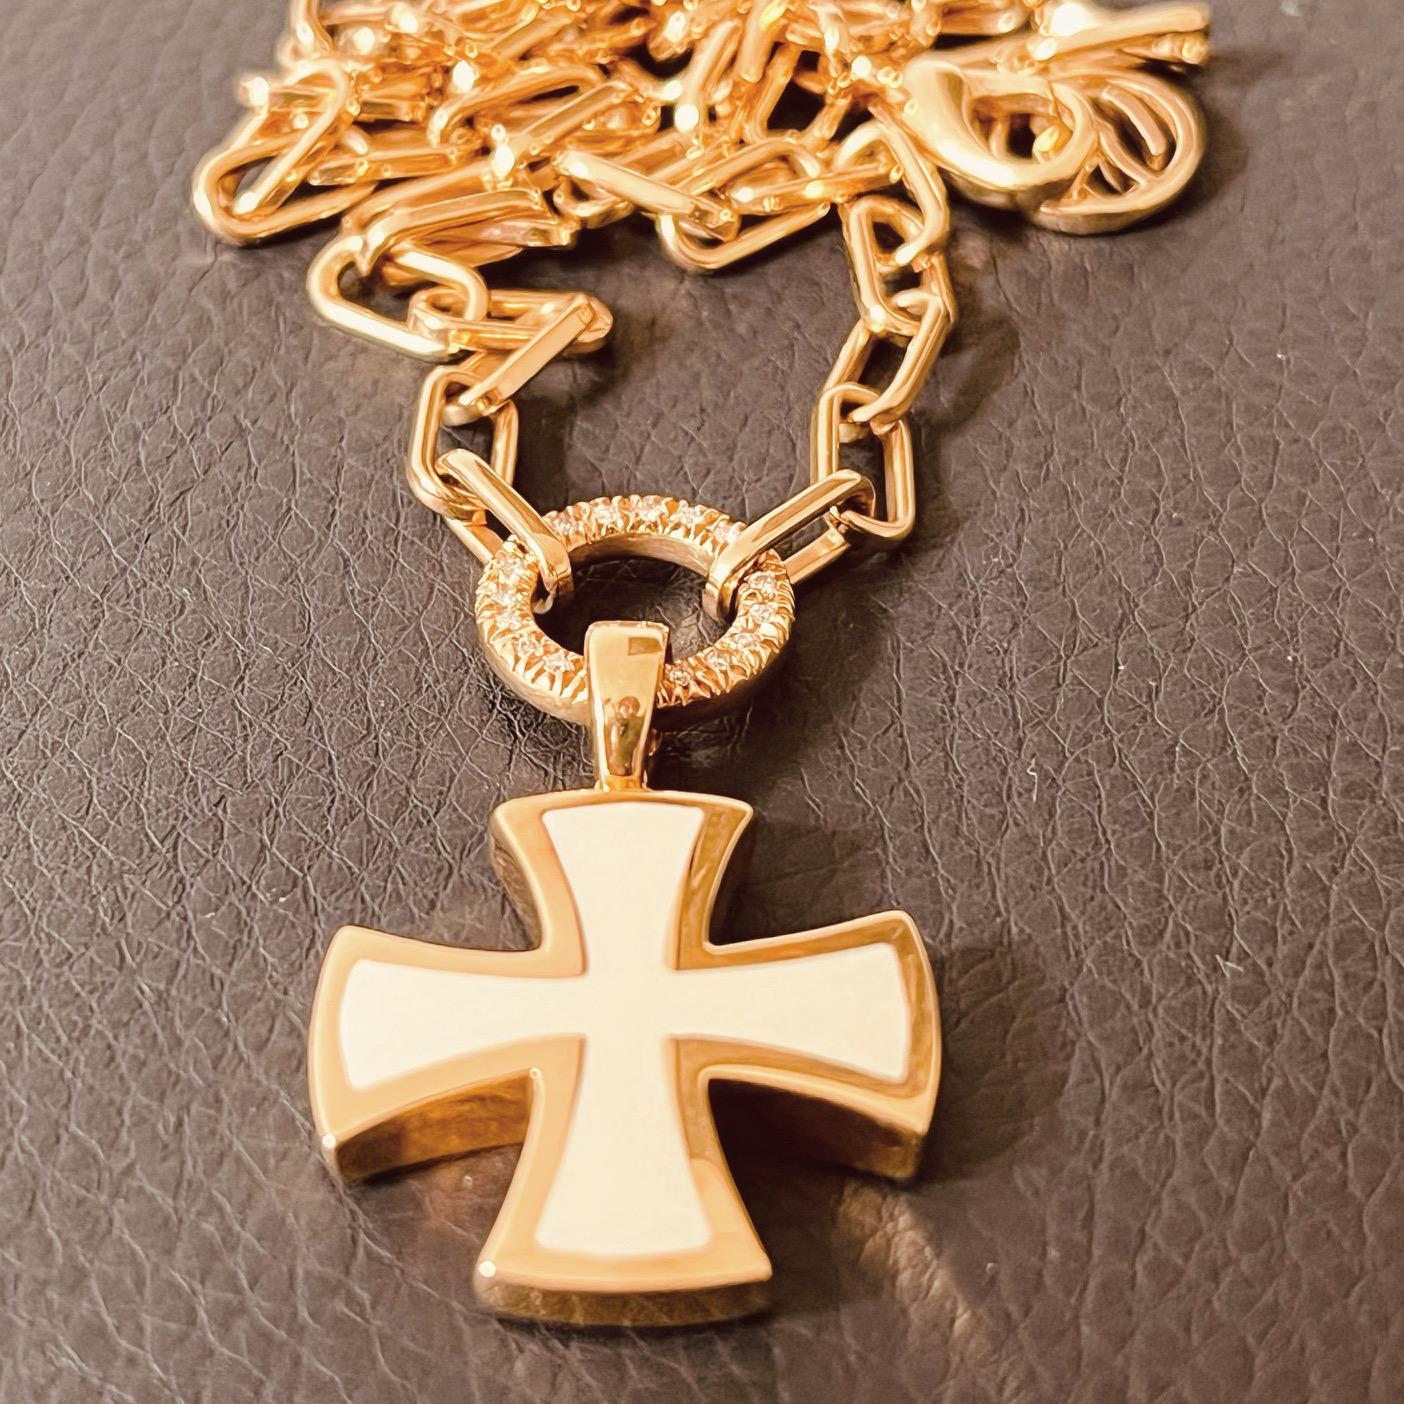 18 Carat Gold Chain Connected To A Diamond Suspended Ring & Enamel Cross Pendant For Sale 8